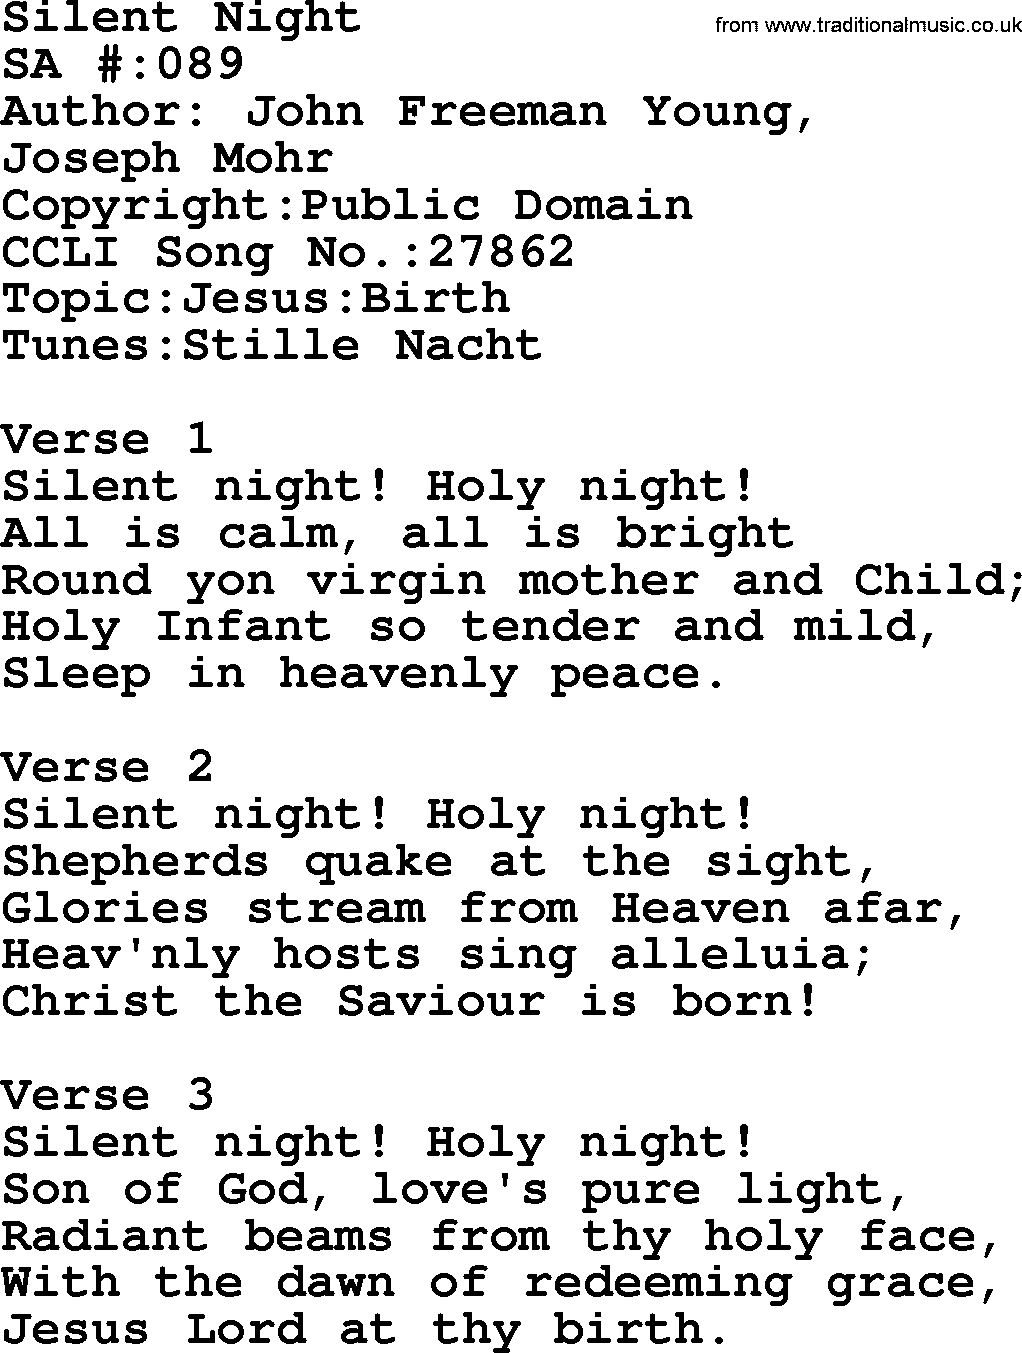 Salvation Army Hymnal, title: Silent Night, with lyrics and PDF,